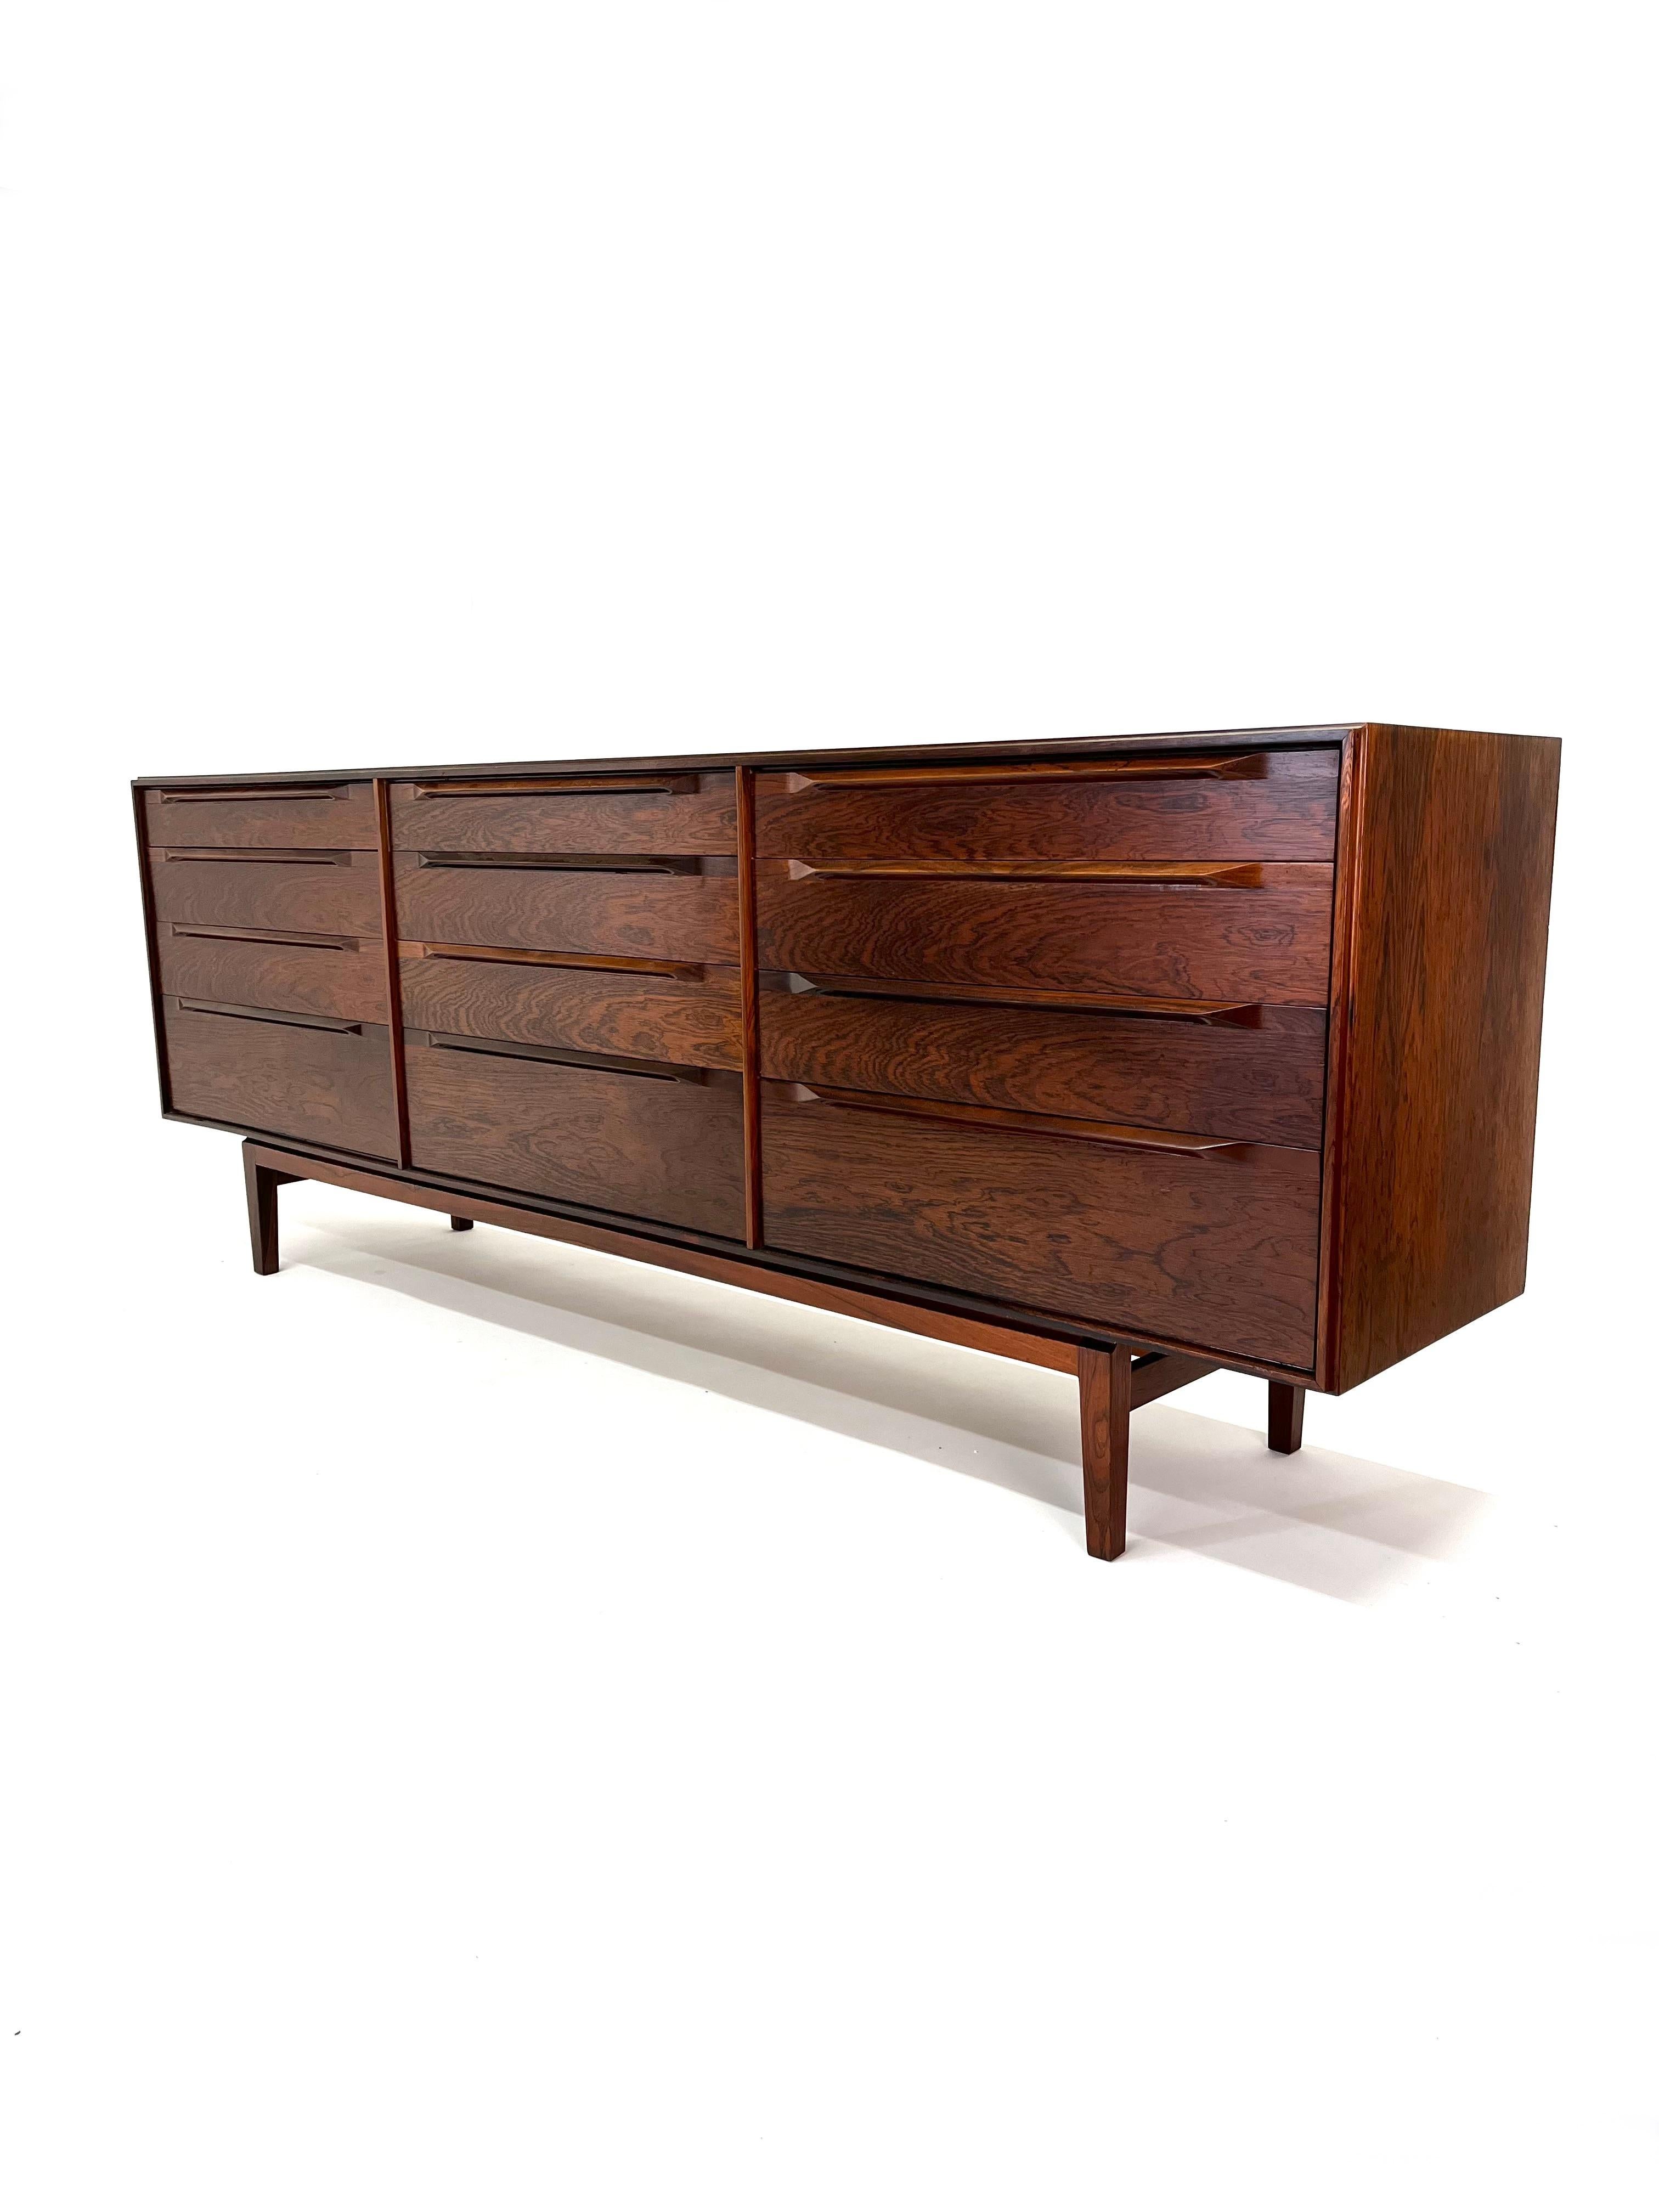 Designed by Ib Kofod-Larsen, this rarely seen rosewood 12 drawer cabinet is beautifully constructed with dove-tailed drawer fronts with sculpted drawer pulls. It is perfectly suited for use as a dresser or credenza. The case is supported by solid